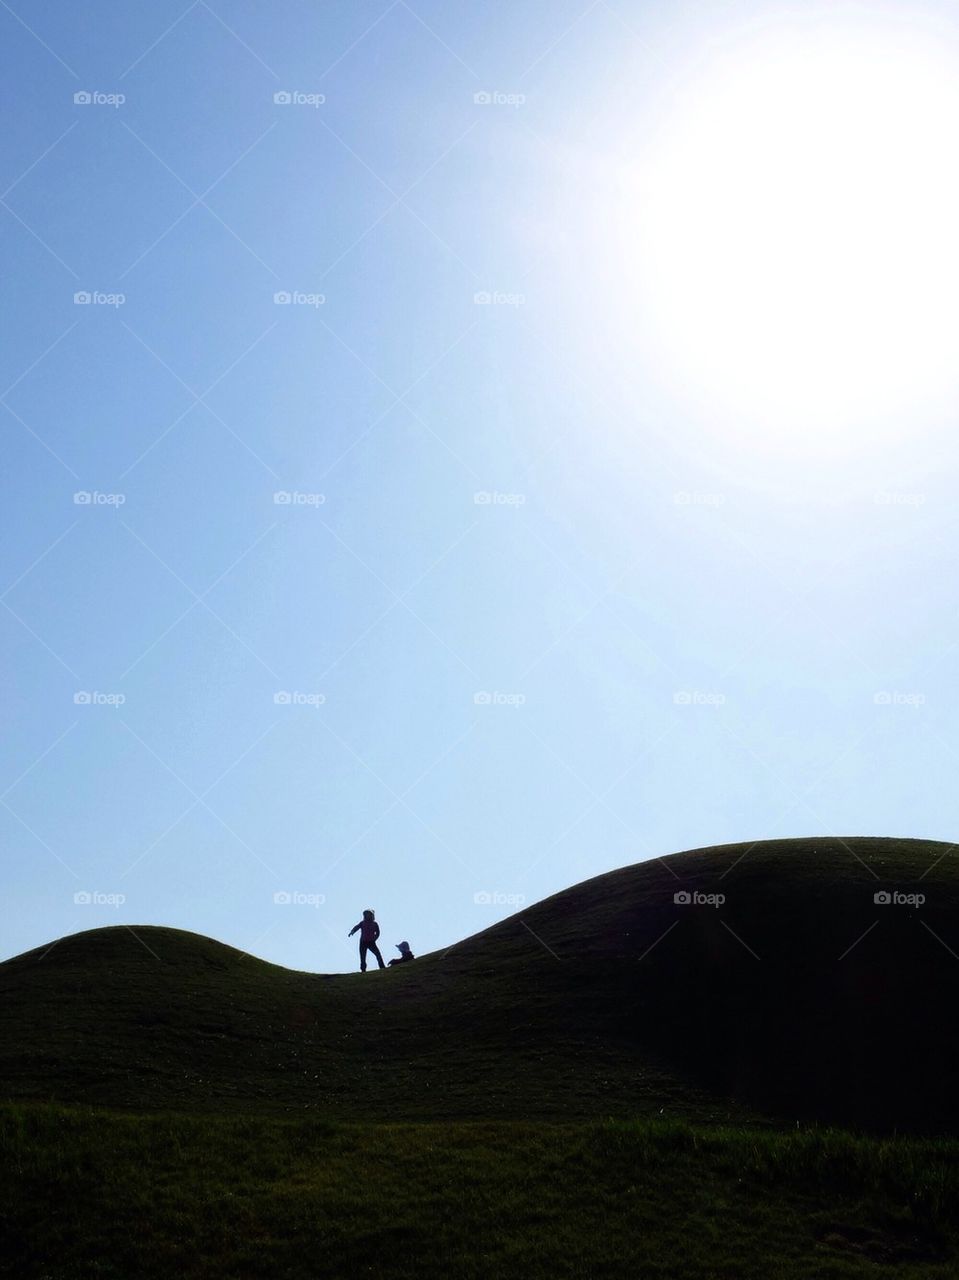 Silhouette of 2 persons on a rolling hill